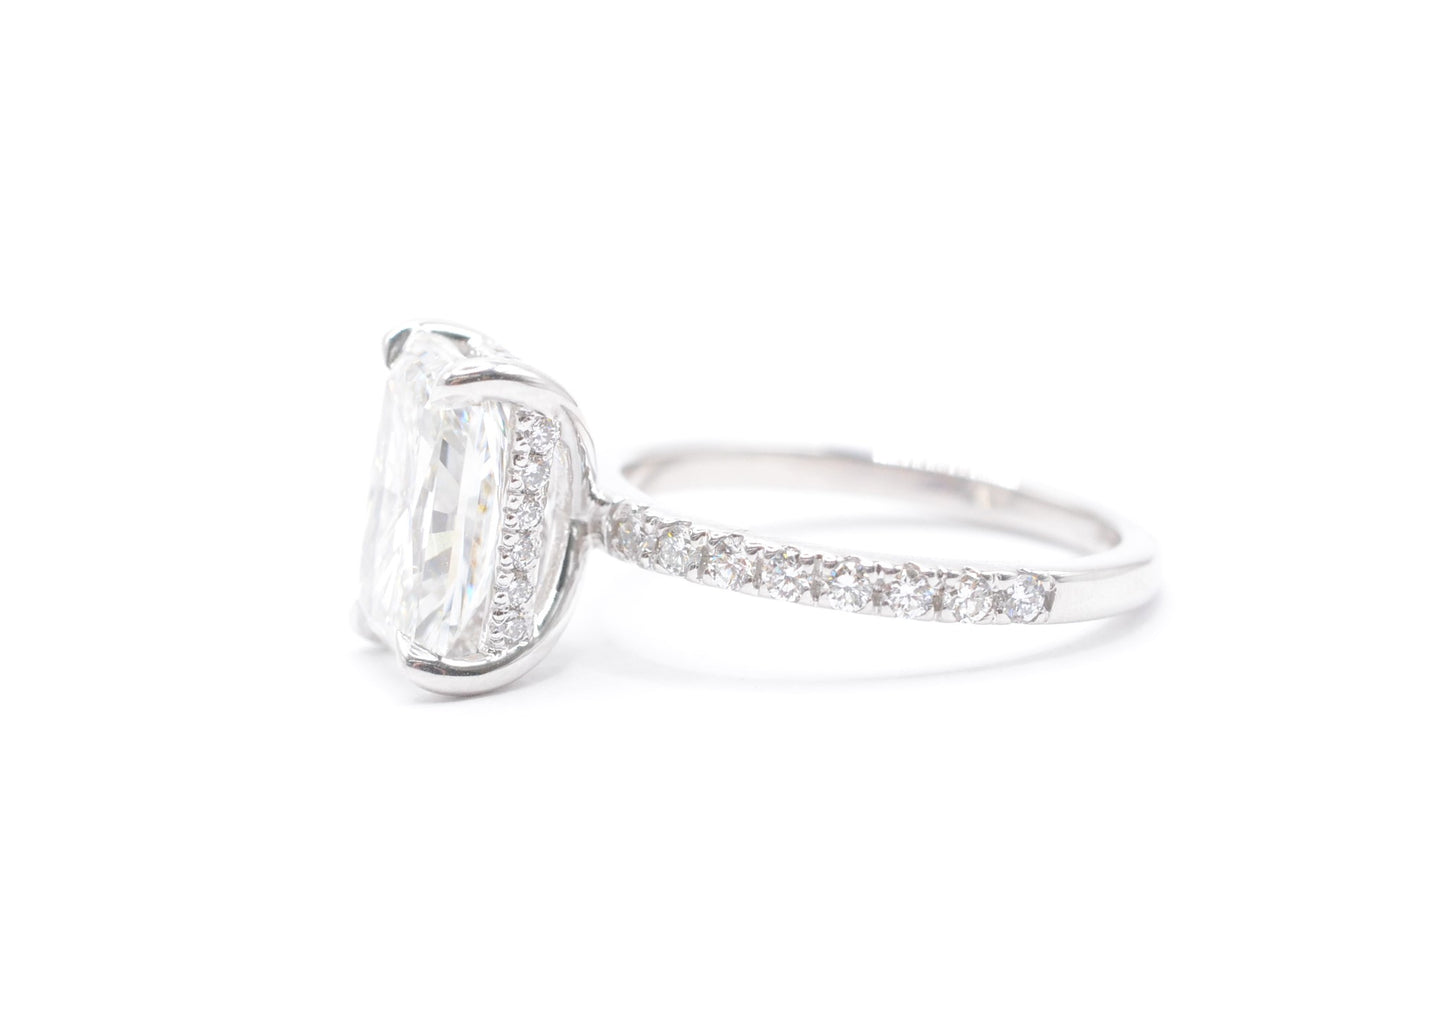 2.5ct Radiant Lab-Grown Diamond in 14K White Gold with Accented Underhalo Pave Setting Made to Order